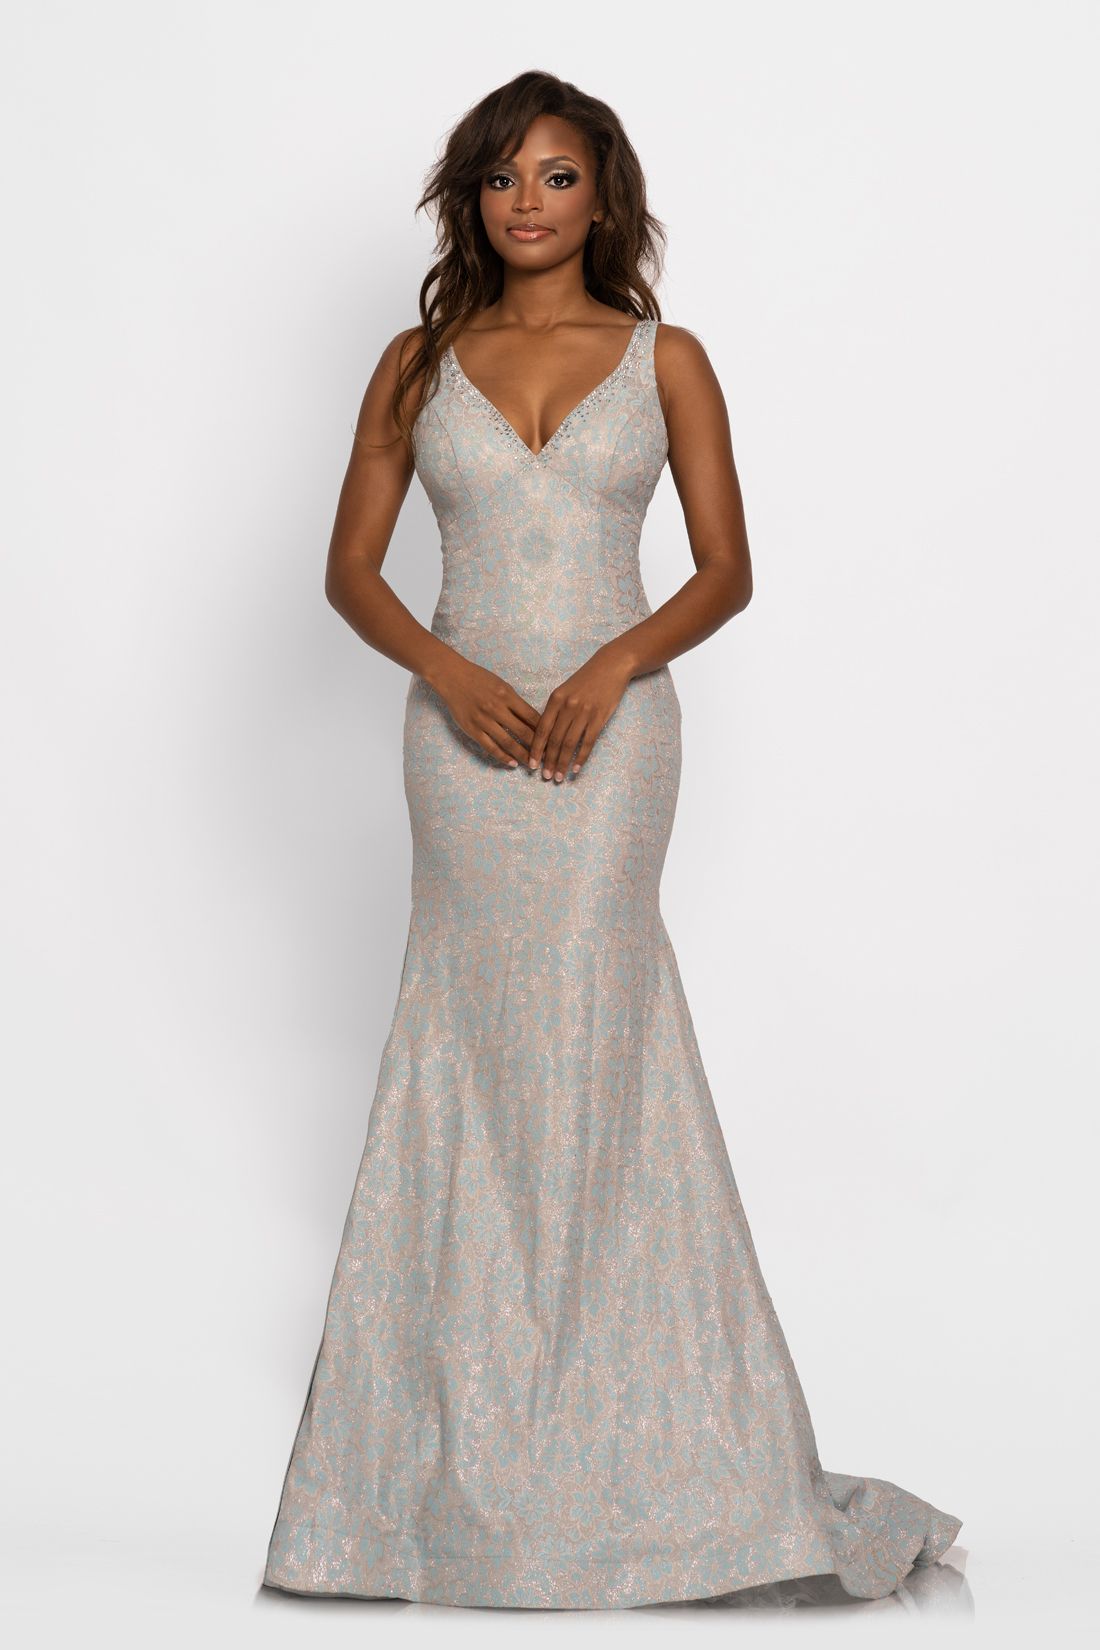 Johnathan Kayne 2259 This is a v neckline glitter lace mermaid prom dress with a v back and sweeping train.  This evening gown has a floral lace pattern.  Colors  Navy, Sky Blue  Sizes  00, 0, 2, 4, 6, 8, 10, 12, 14, 16